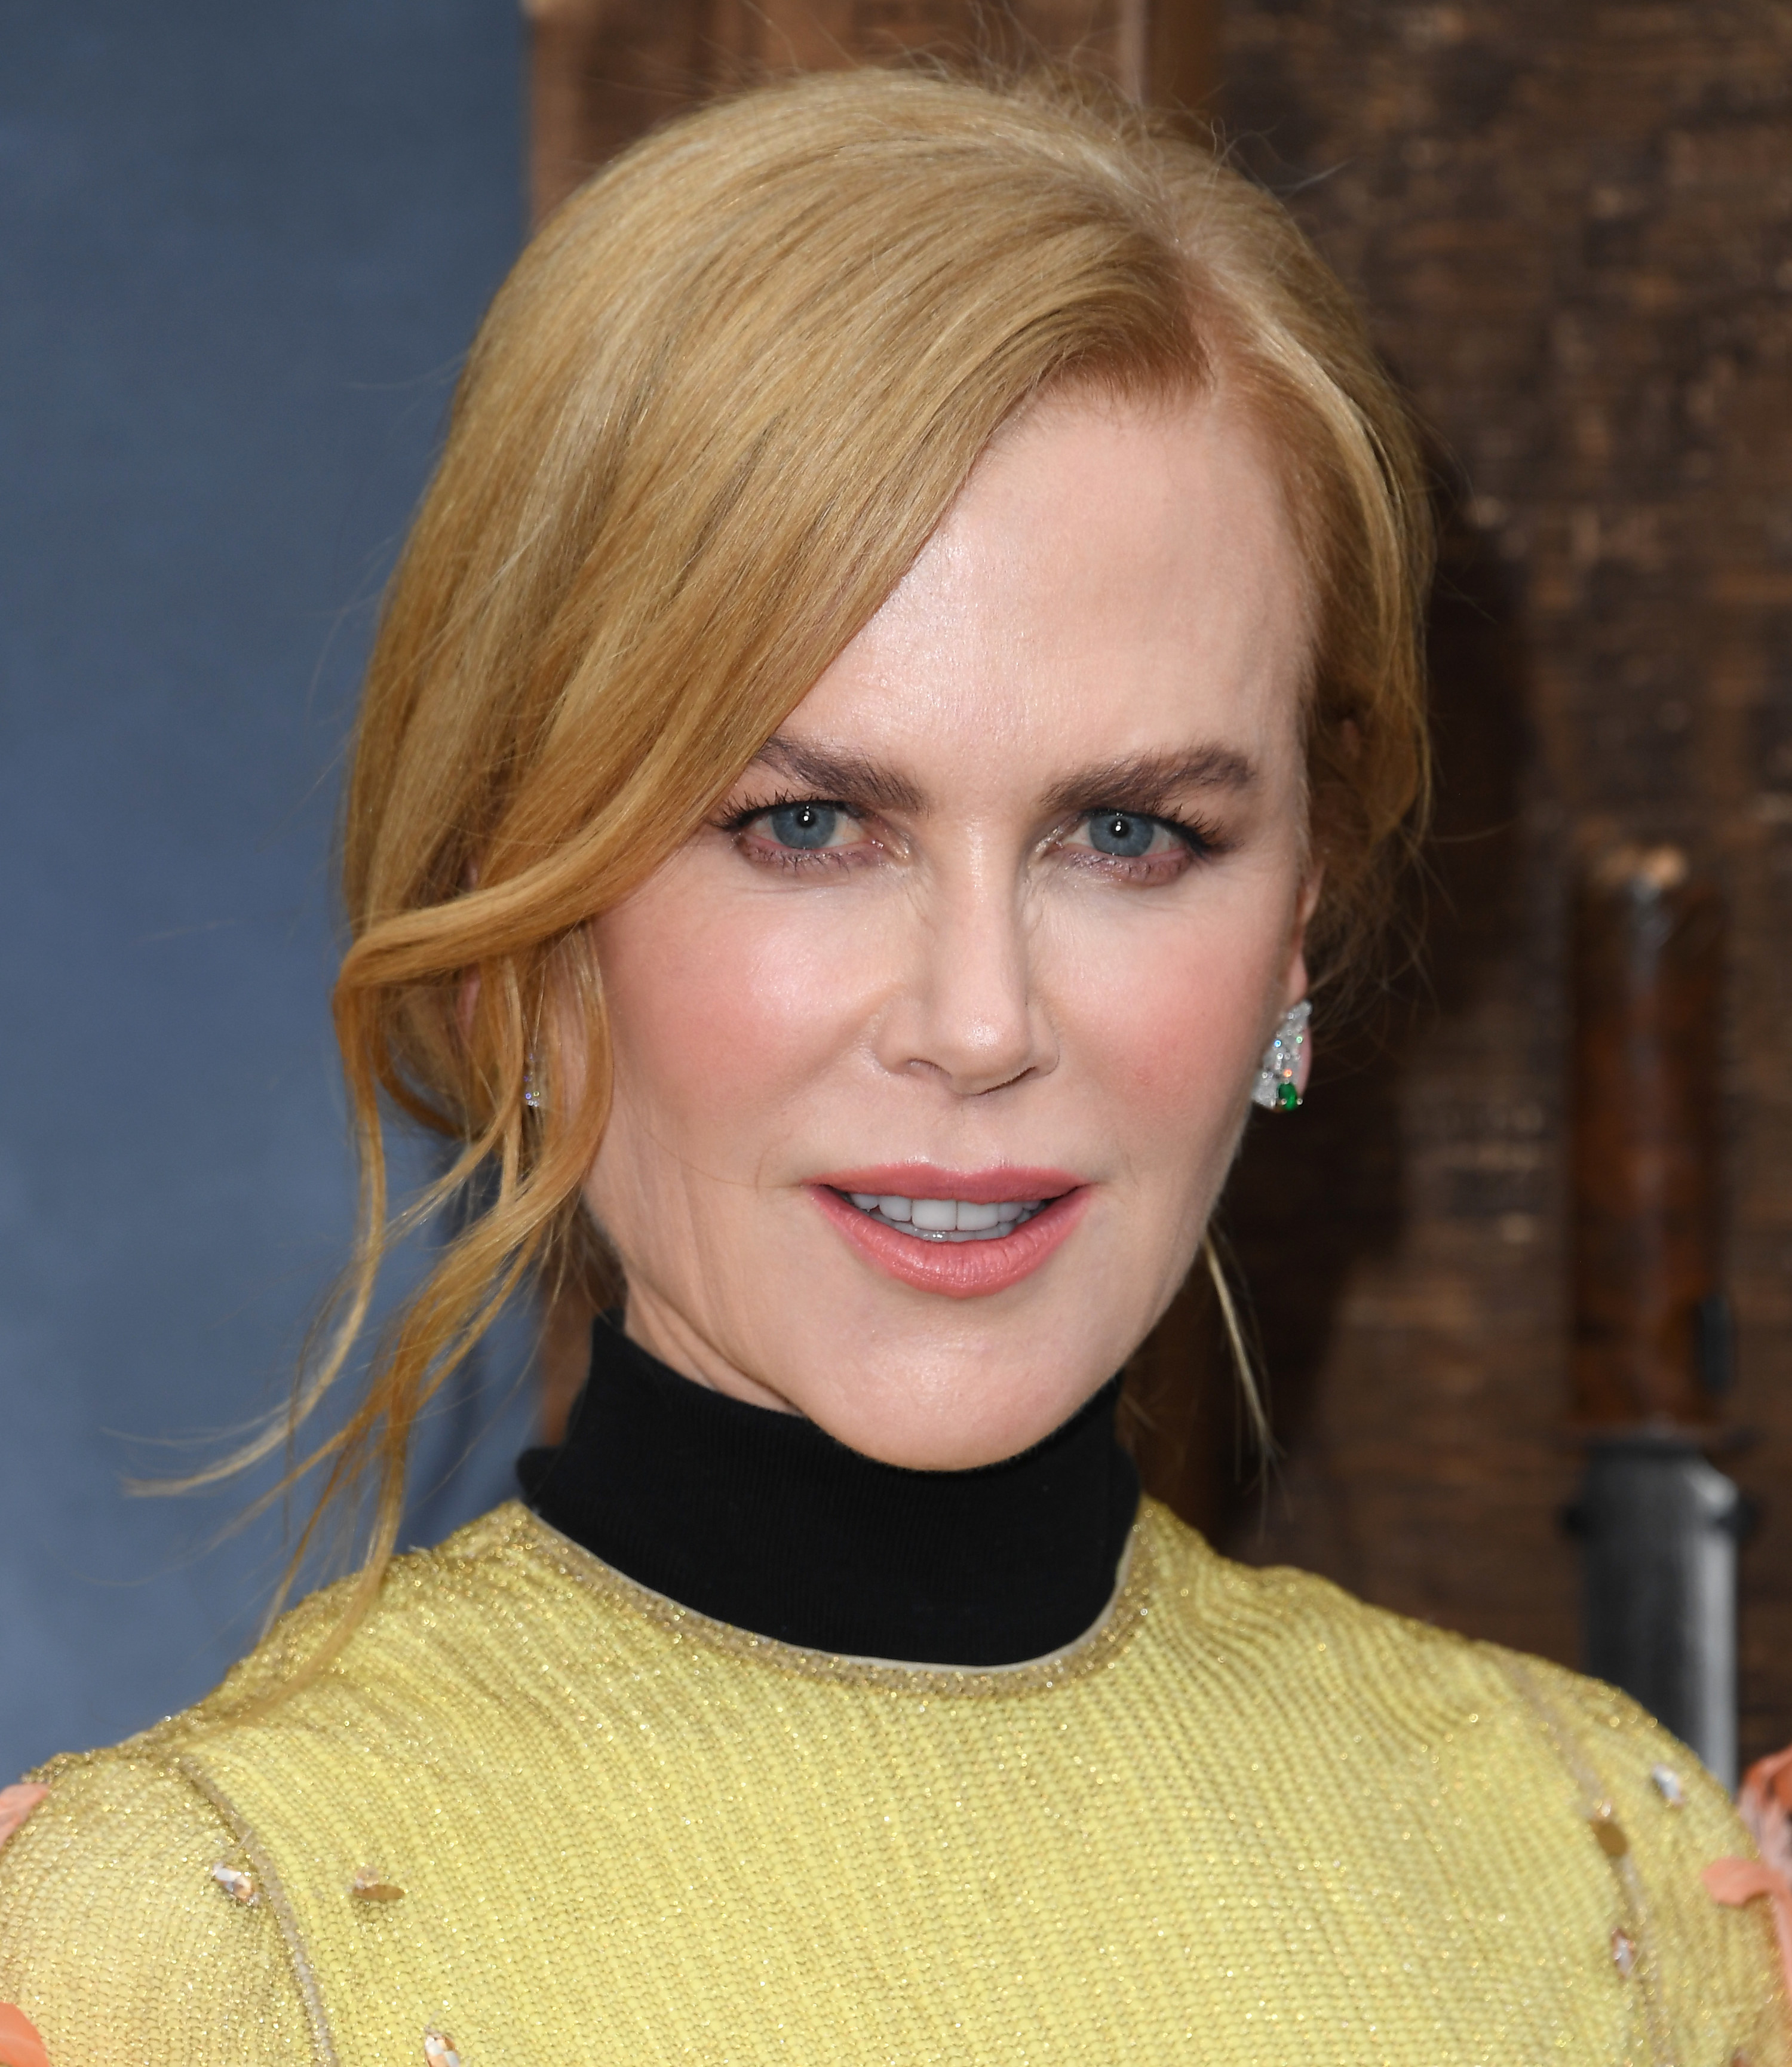 Nicole Kidman at an event, dressed in yellow